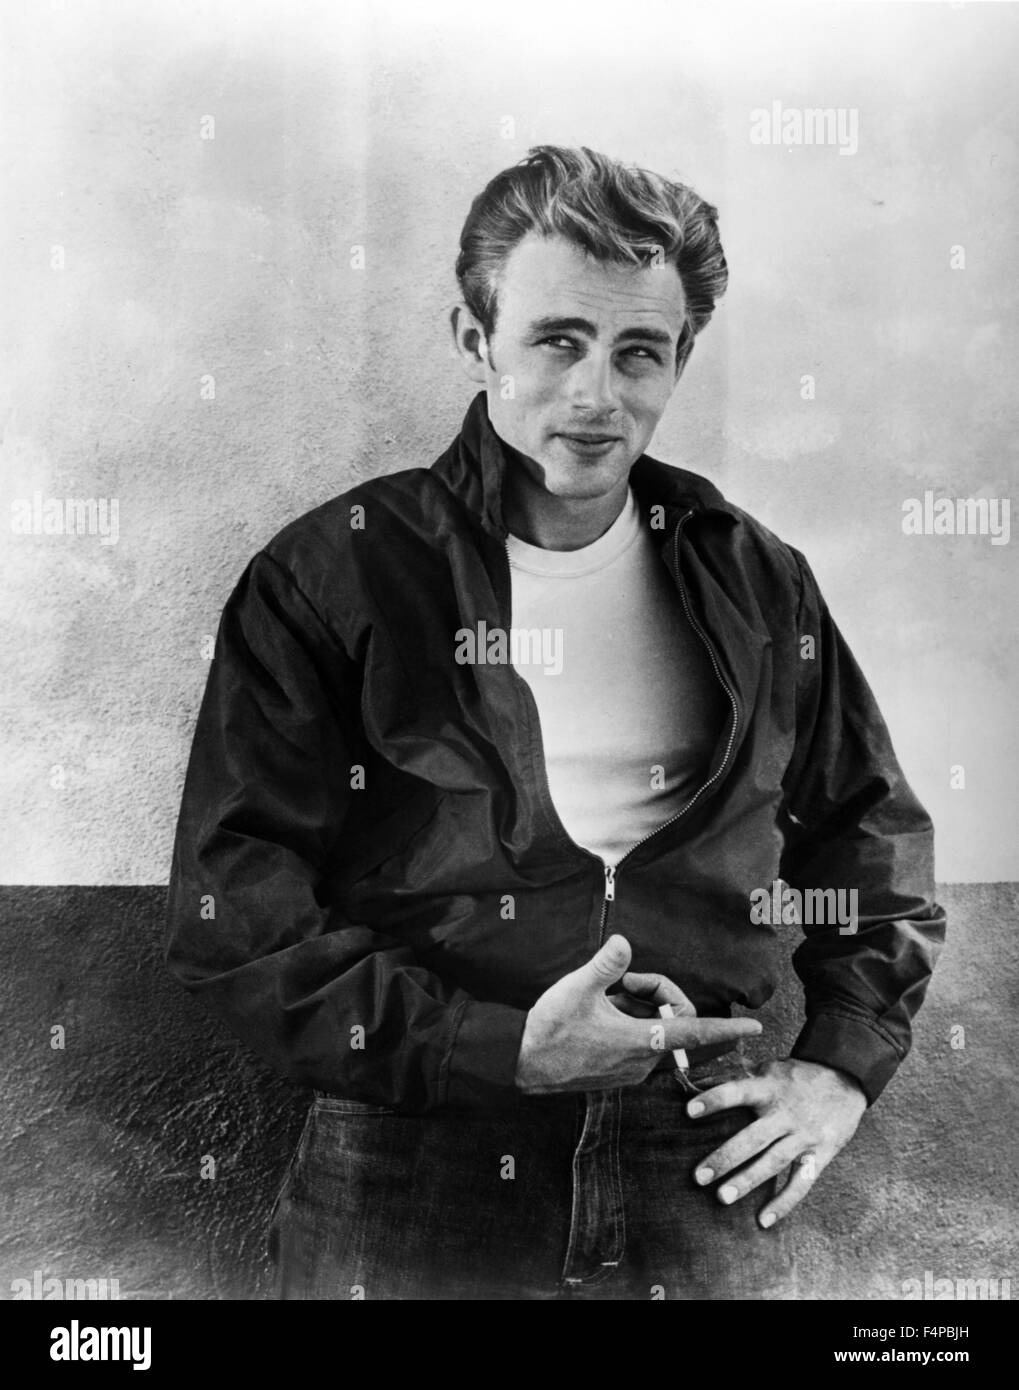 James Dean / Rebel Without A Cause 1955 directed by Nicolas Ray Stock Photo